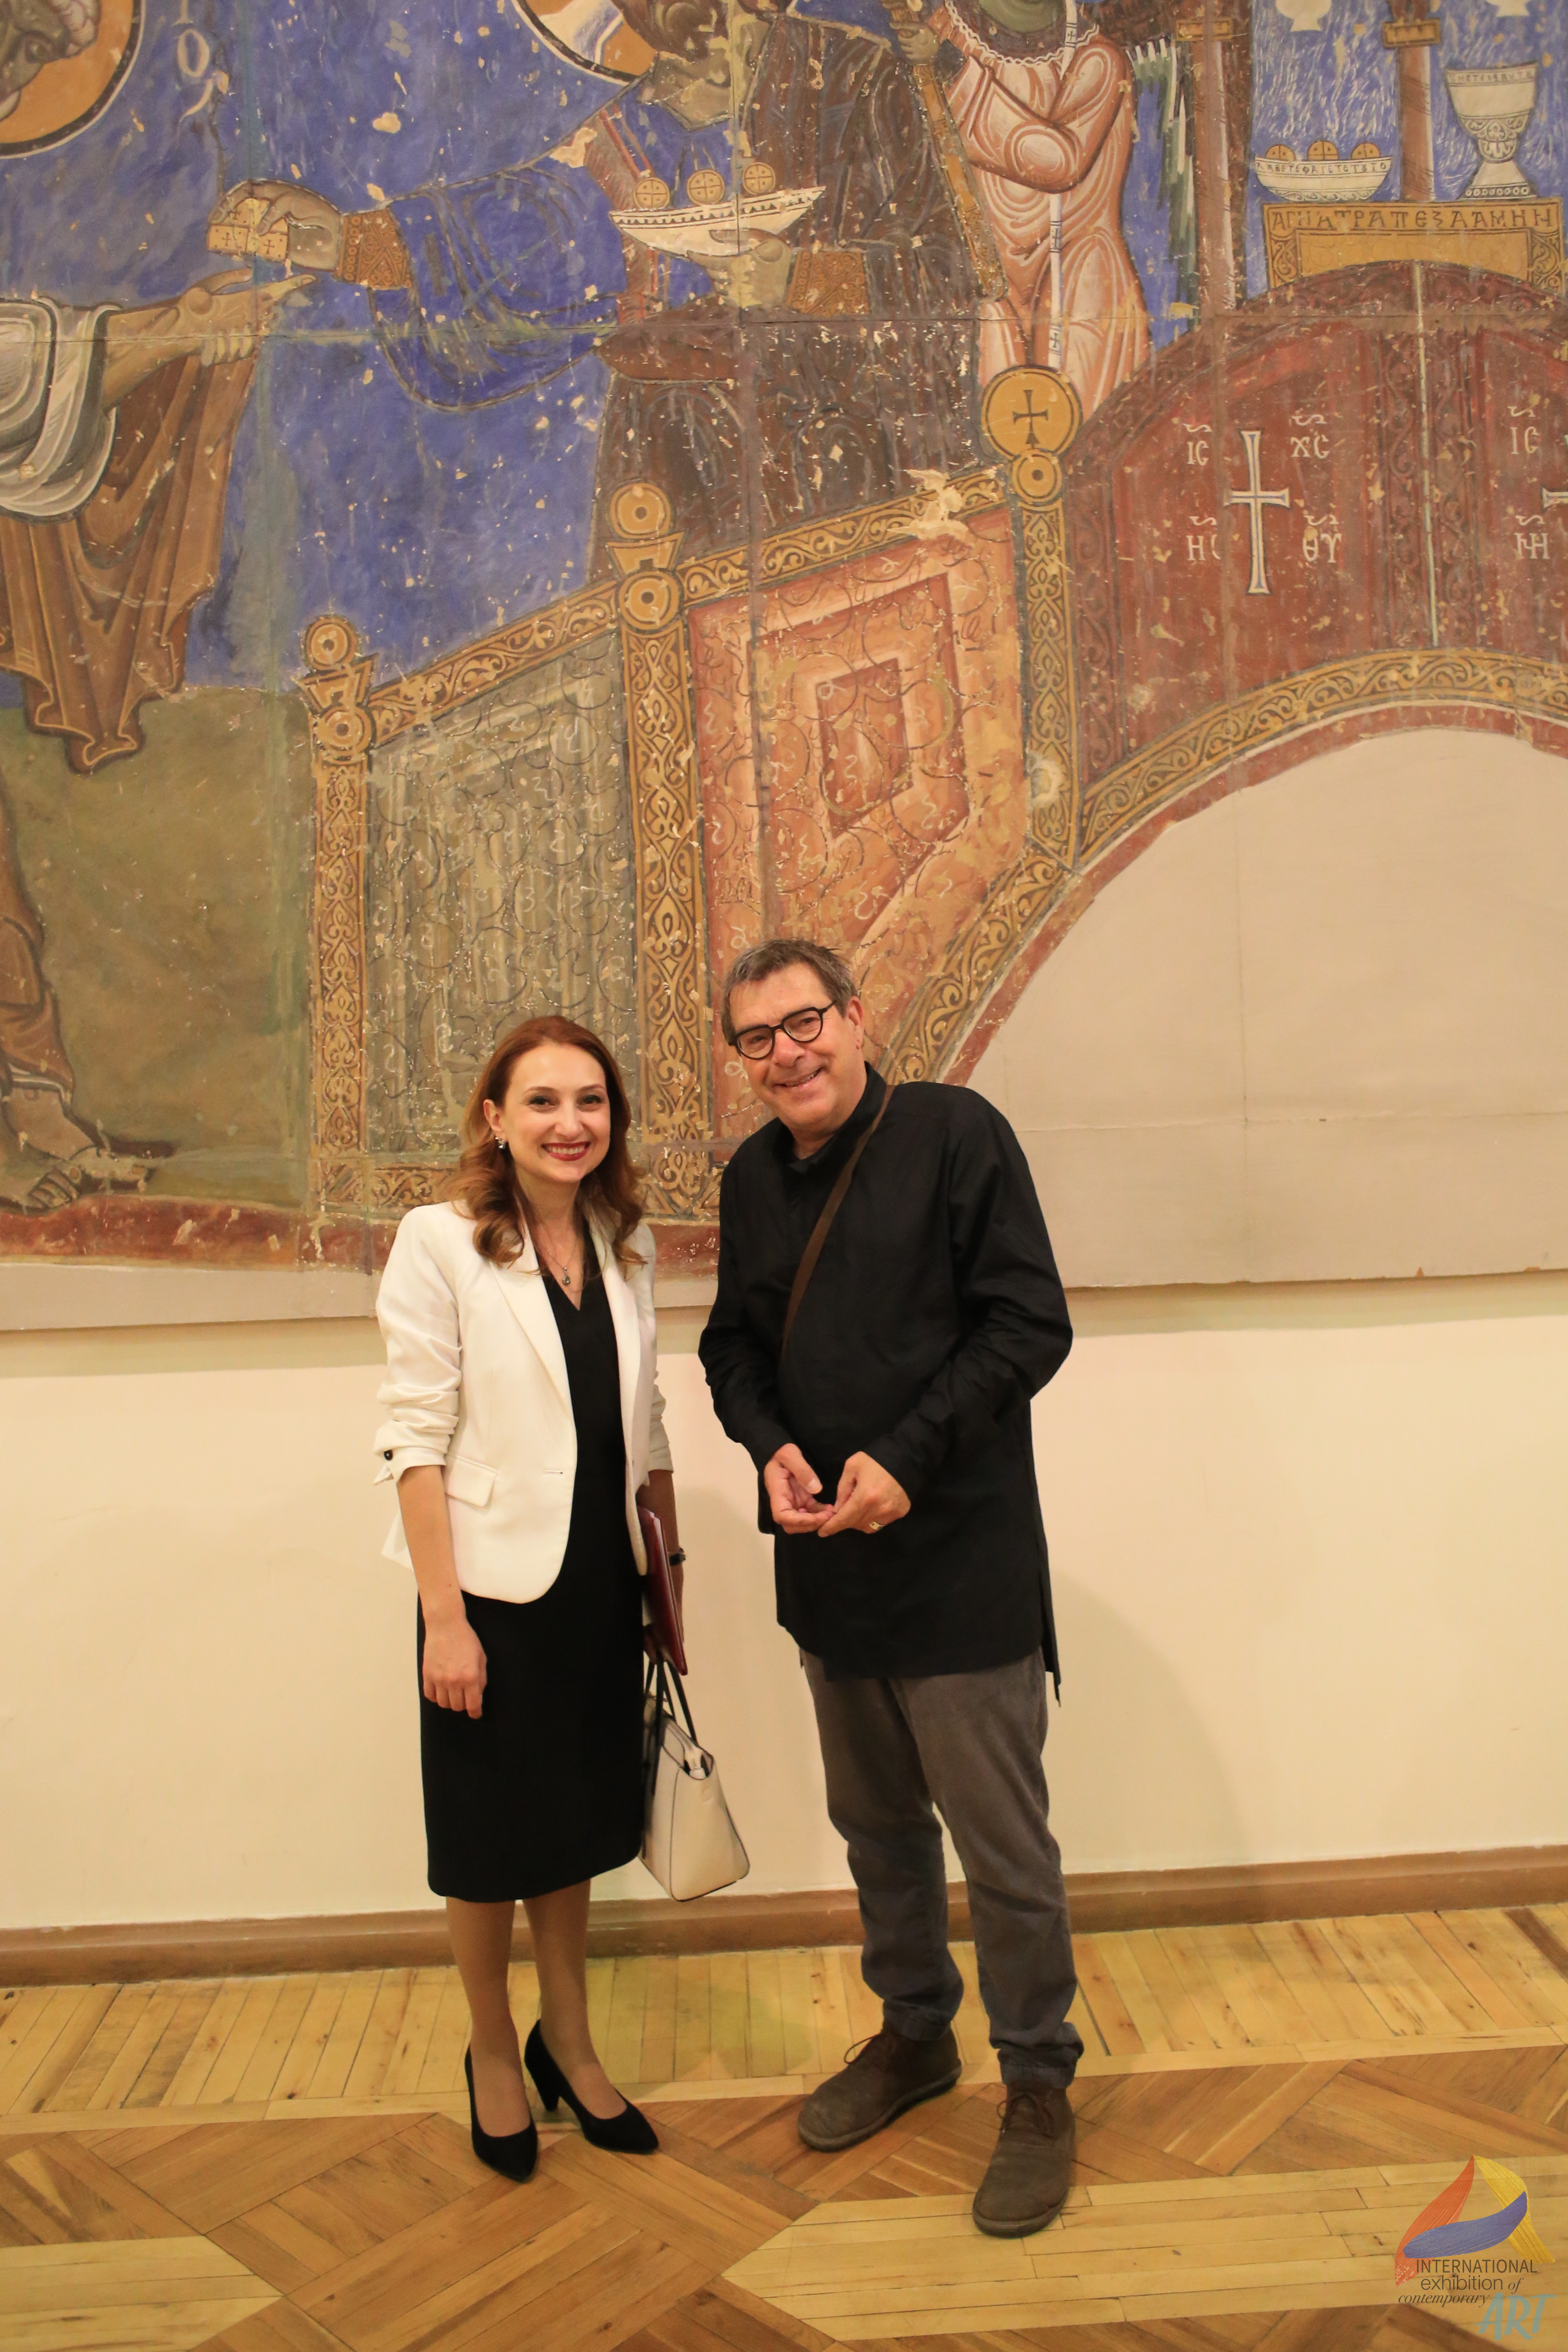 Minister_of_Culture_Armenia_Lilit Makunts_and_composer-sonic_artist_Roland_Kuit.jpg